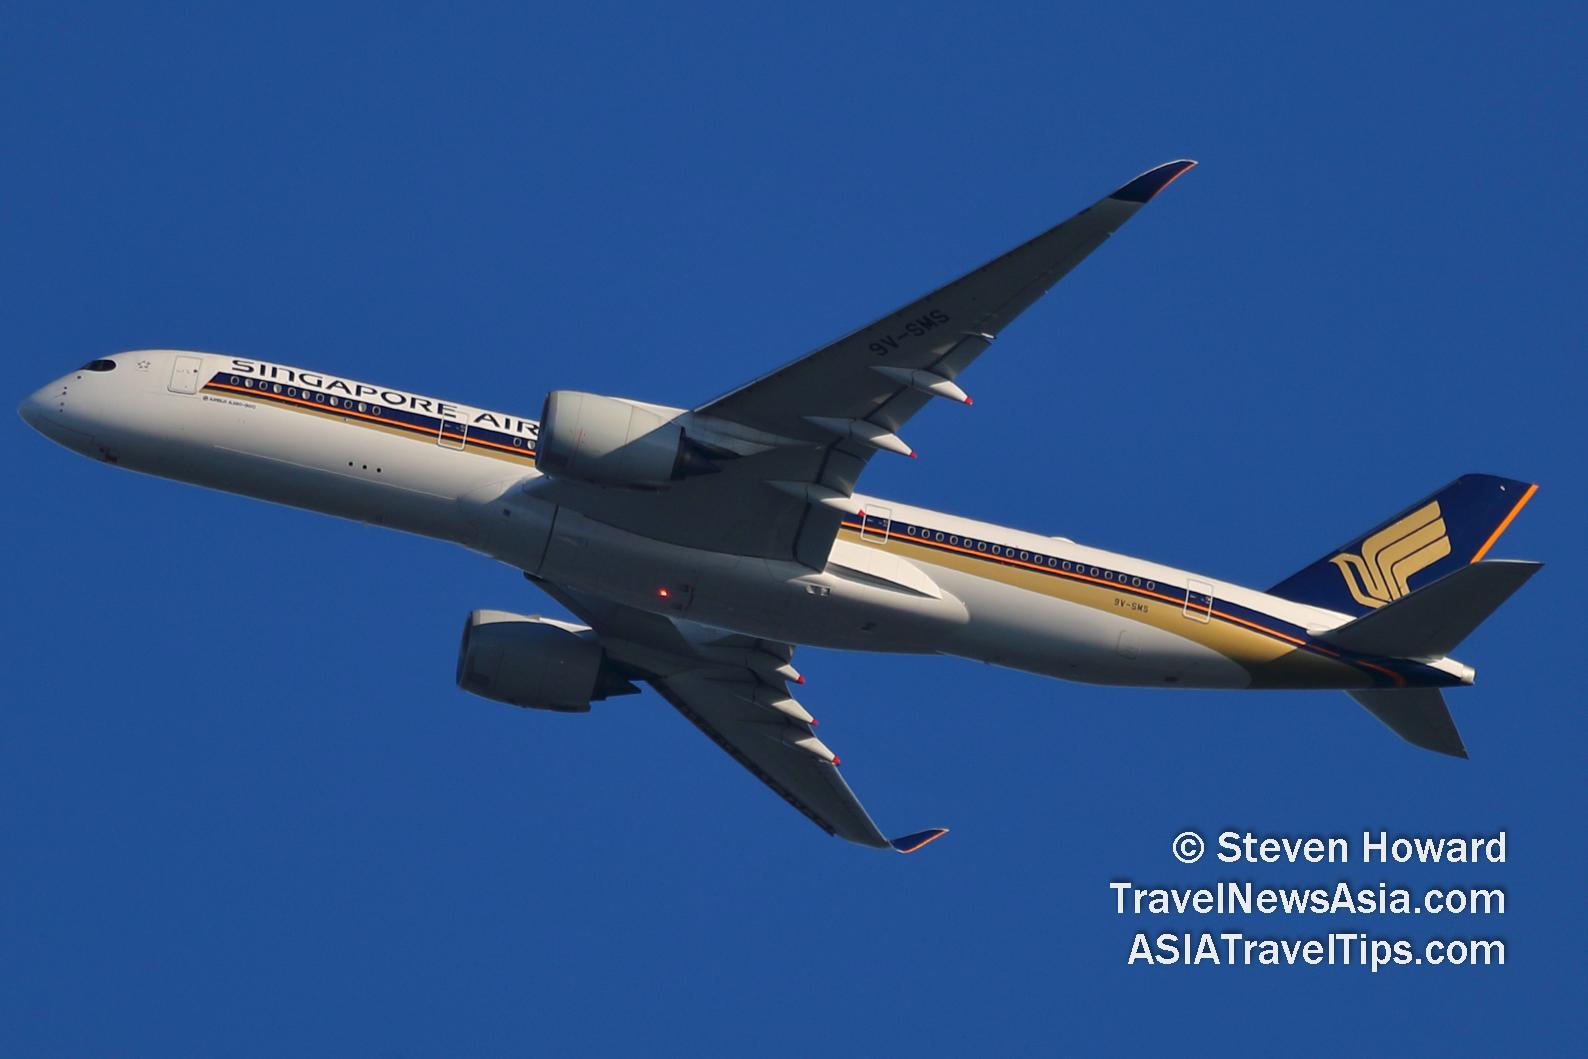 Singapore Airlines Airbus A350-900 reg: 9V-SMS. Picture by Steven Howard of TravelNewsAsia.com Click to enlarge.